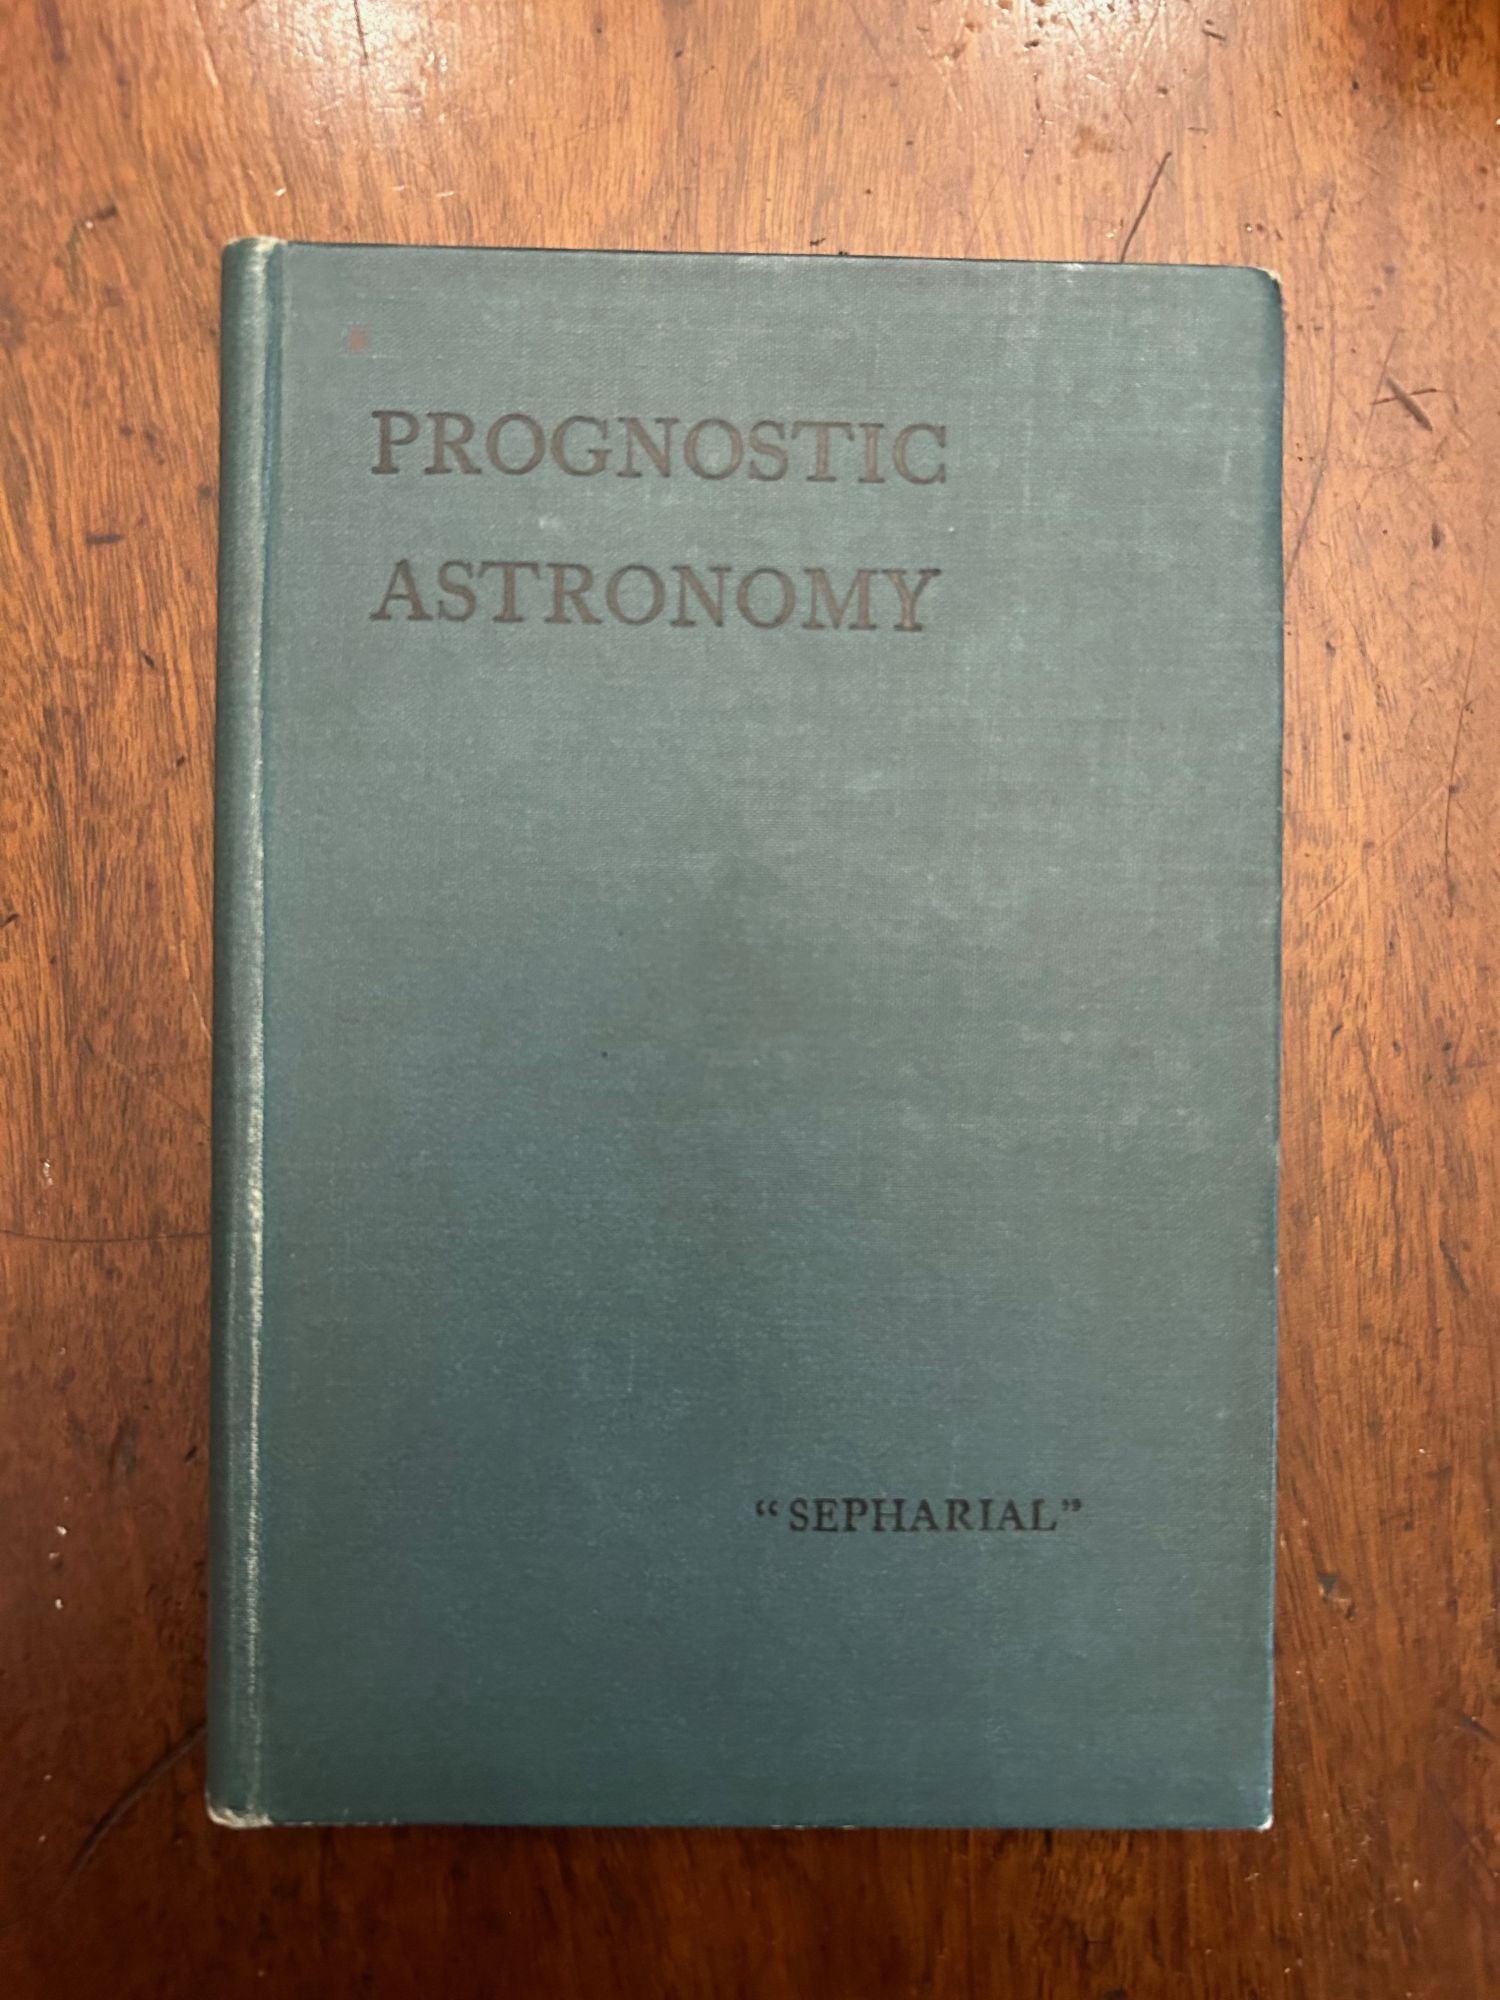 Item #11285 Prognostic Astronomy: The Scientific Basis of the Predictive Art commonly called Astrology: to which is added a Complete Set of Tables with Emendations and New Rules for the use of Students. Sepharial, Dr. Walter Gorn Old.